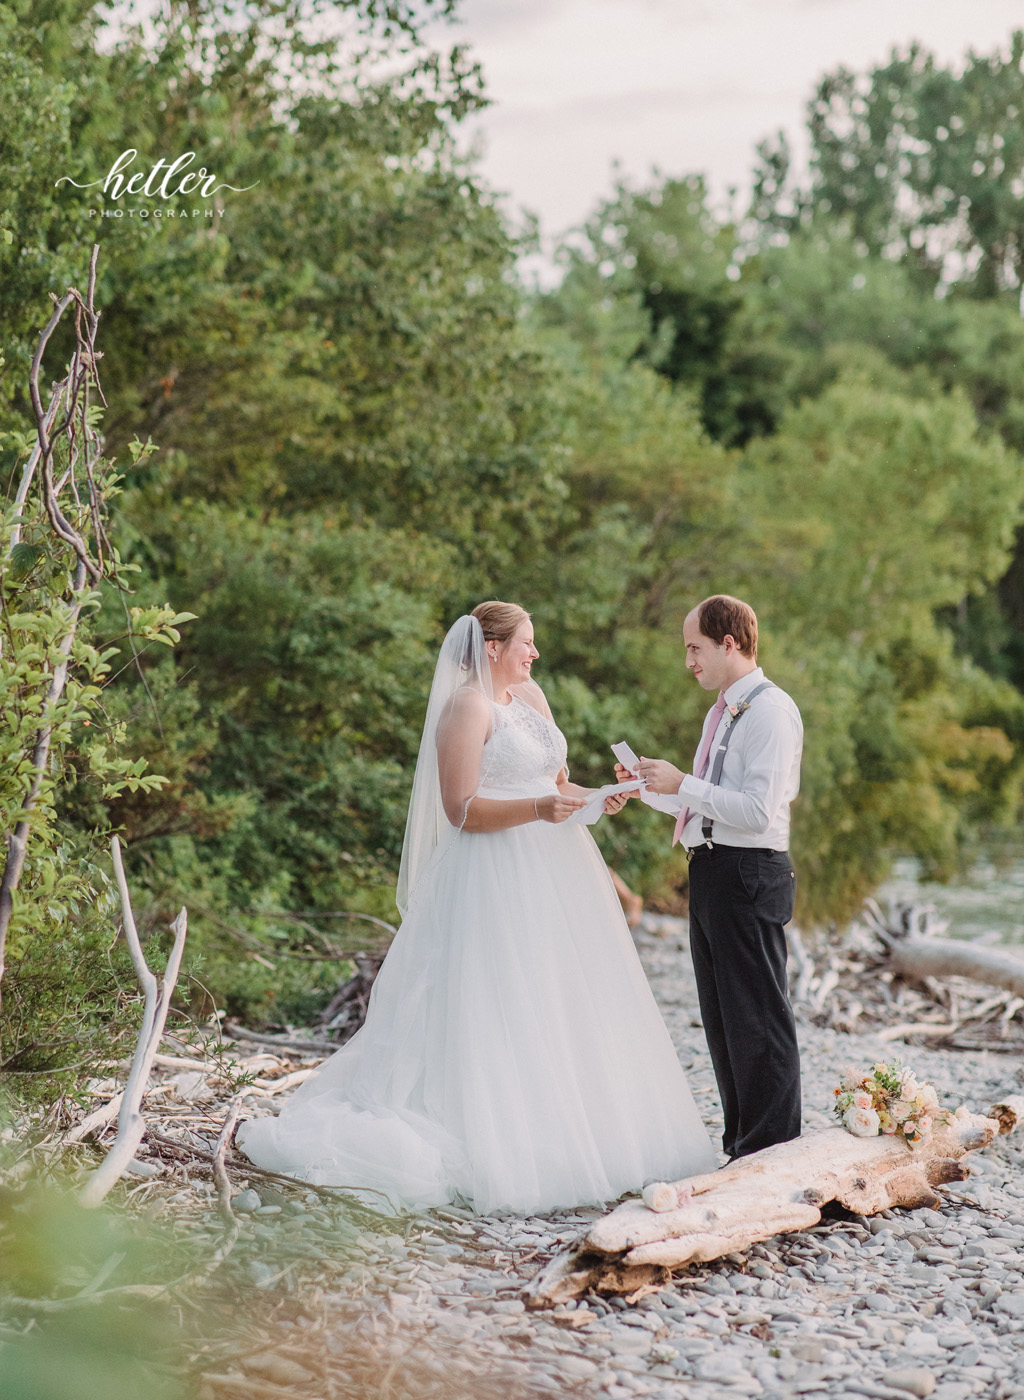 Petoskey wedding photos to celebrate a rescheduled wedding due to Covid with a gorgeous sunset